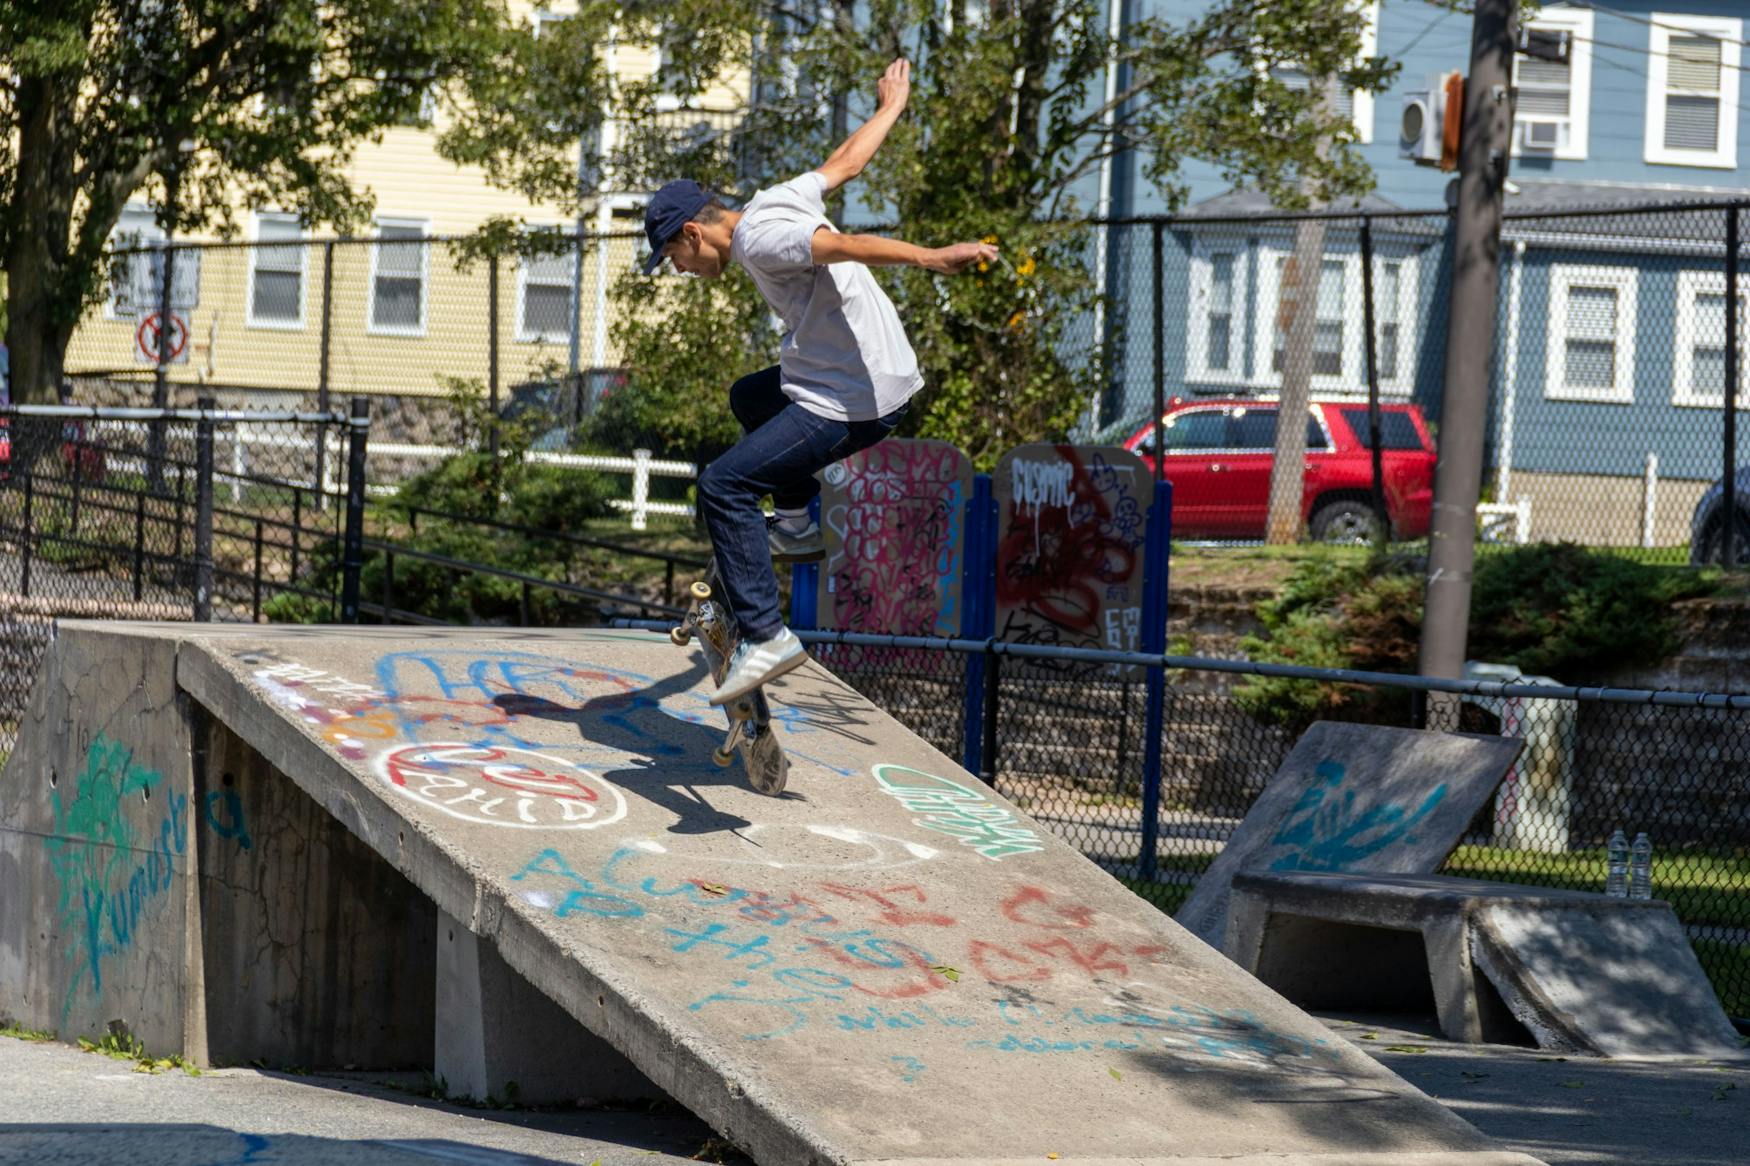 An inside look at the Waltham Skatepark